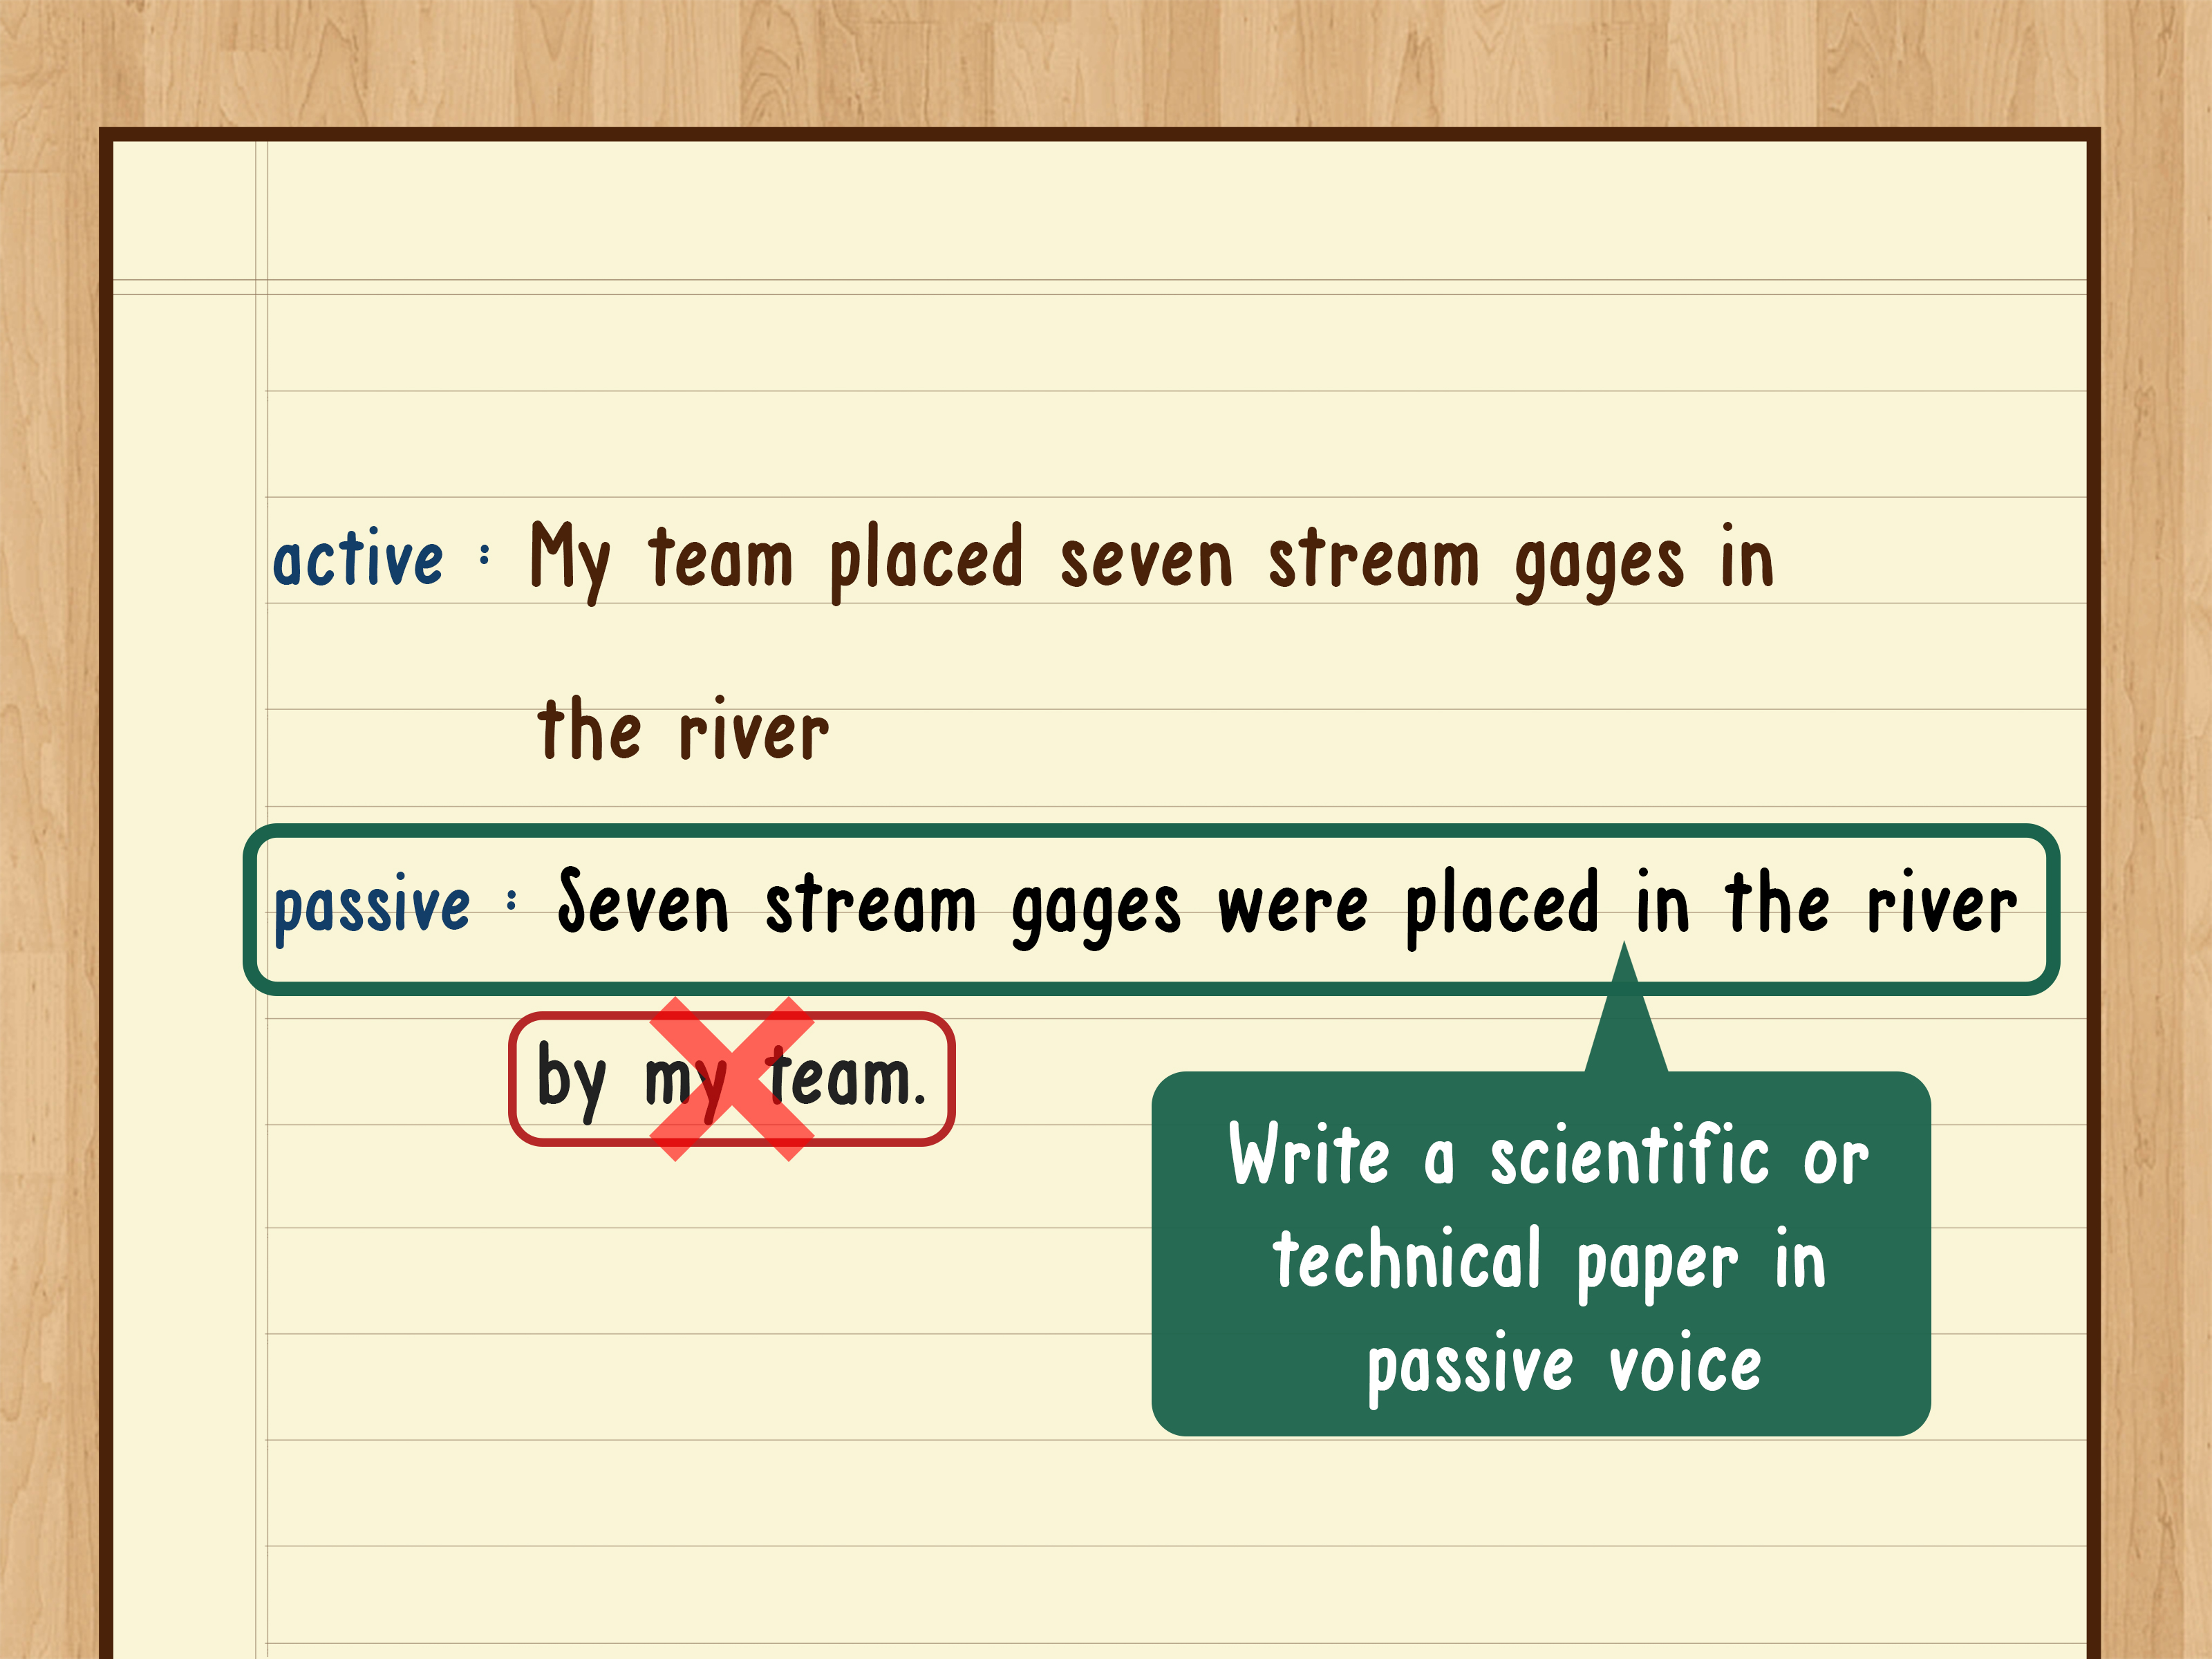 convert from passive voice to active voice